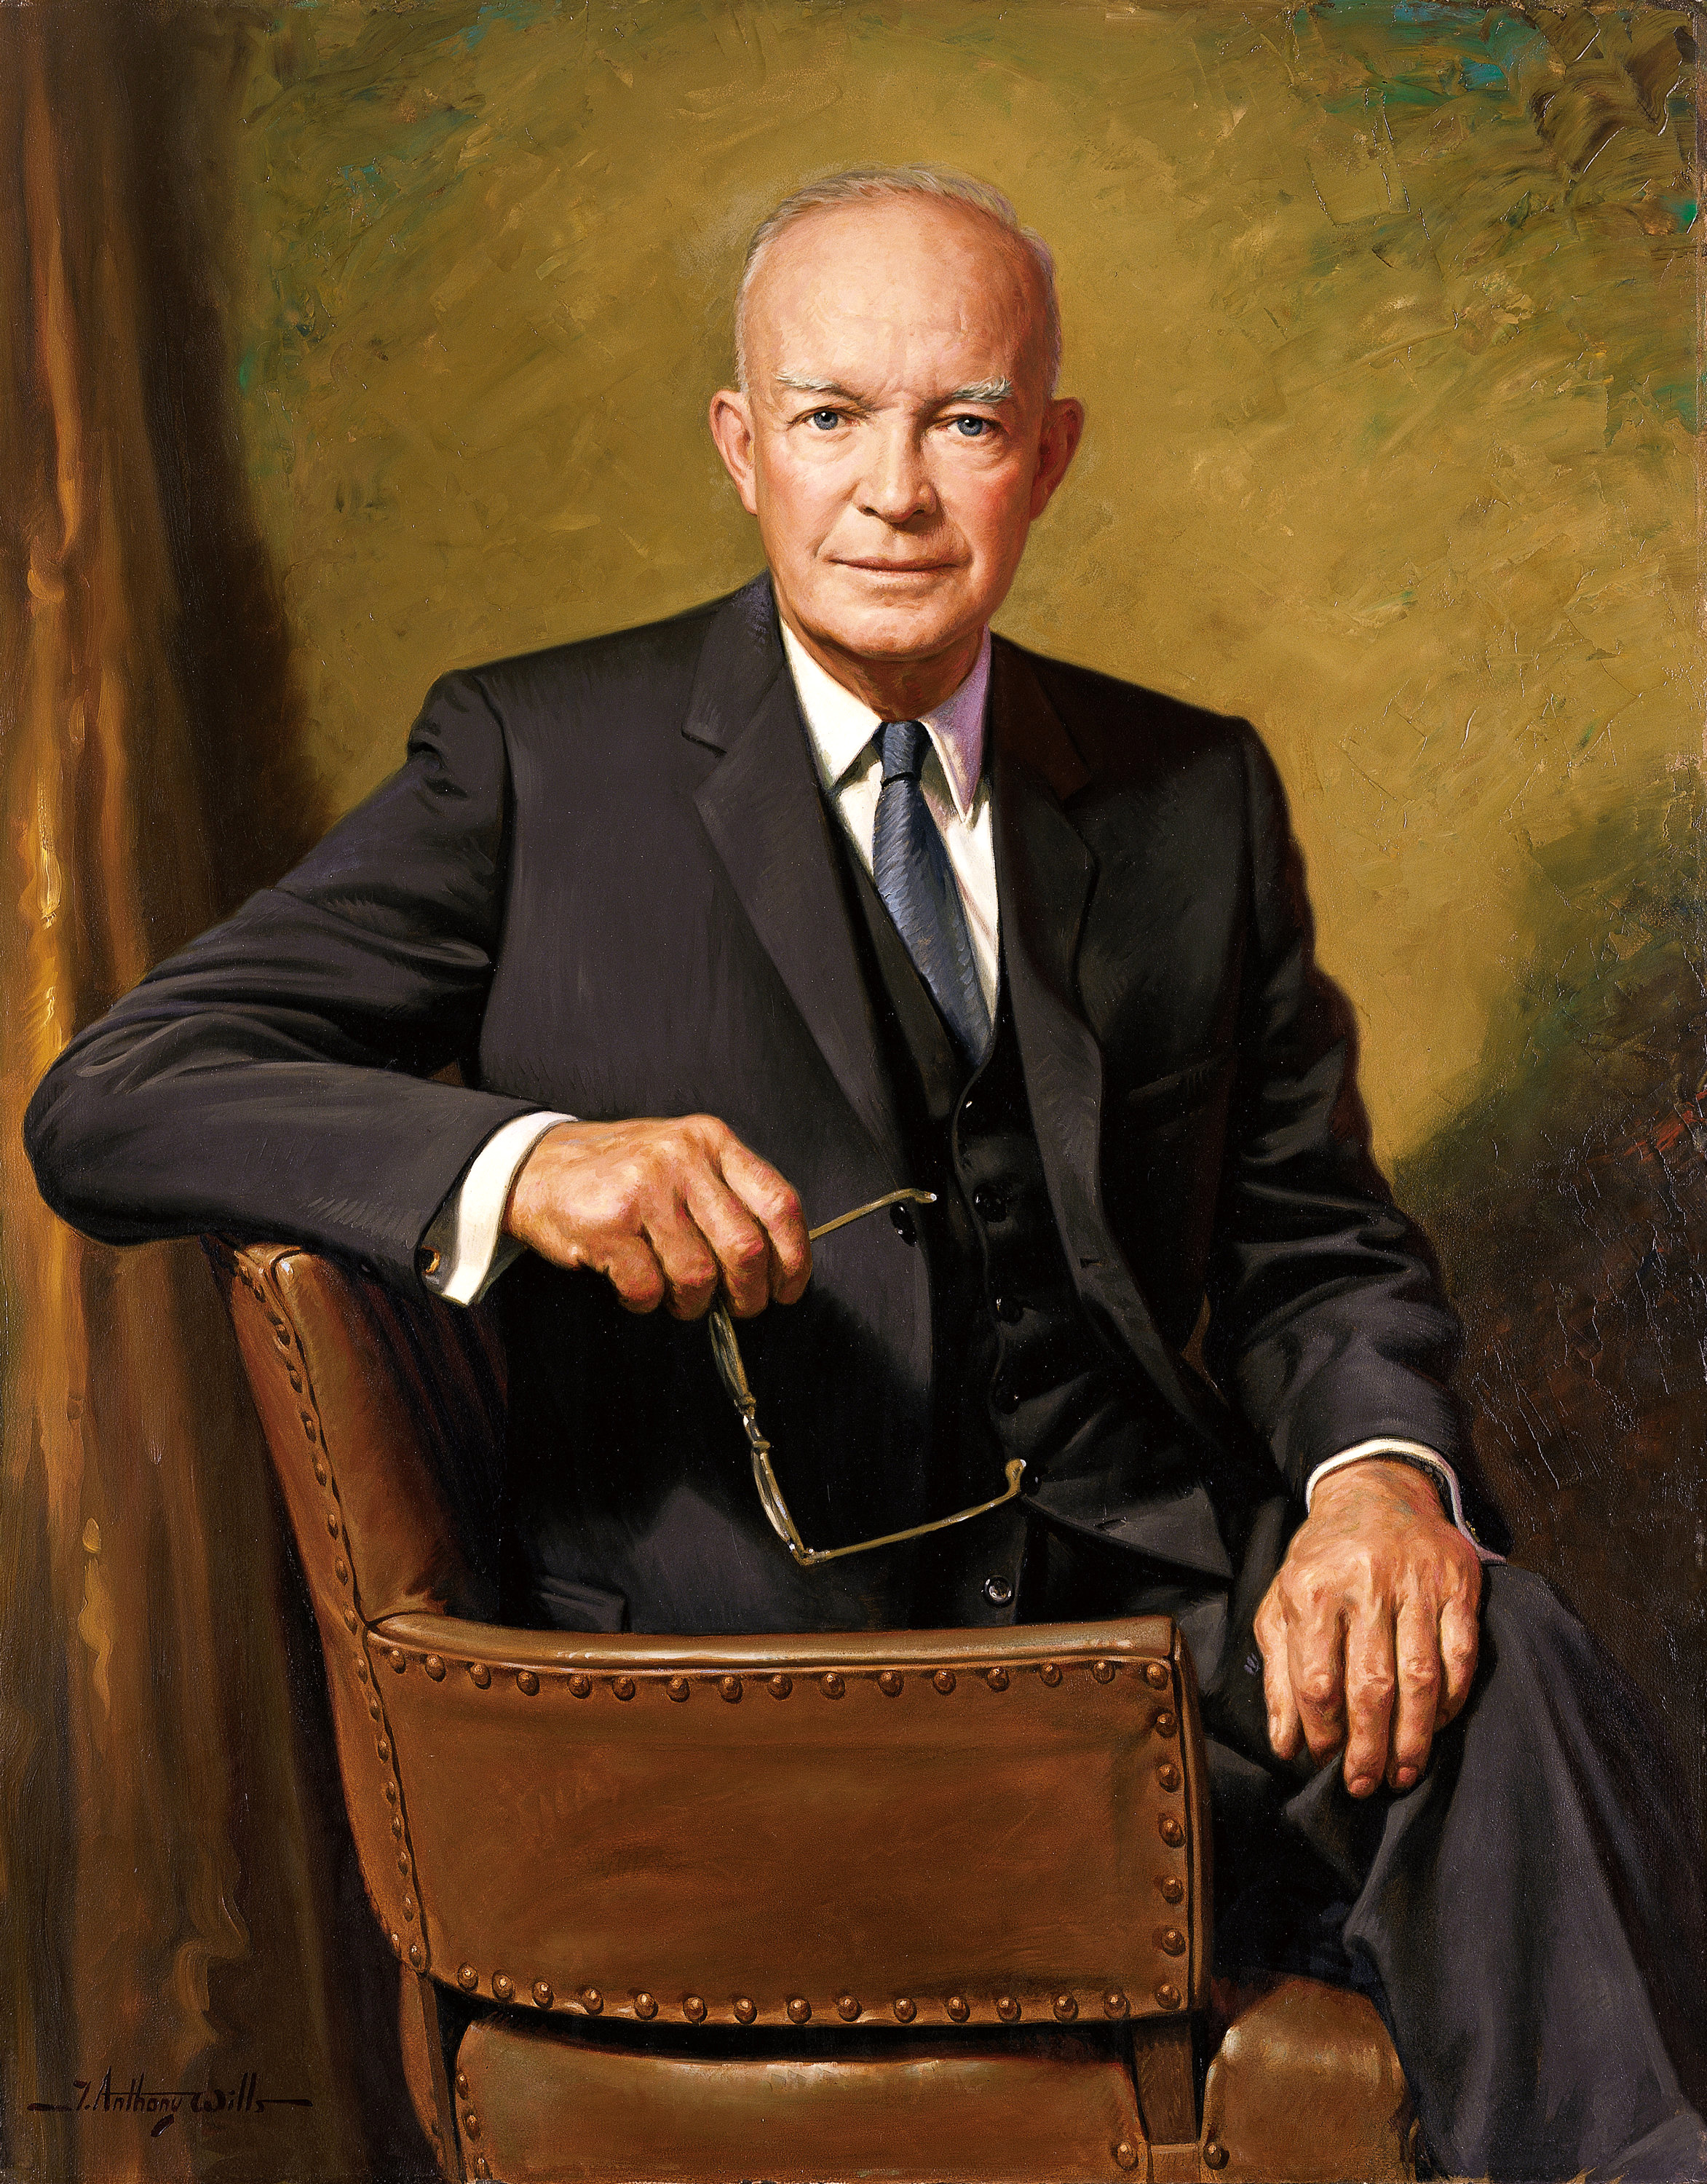 Dwight eisenhower research paper